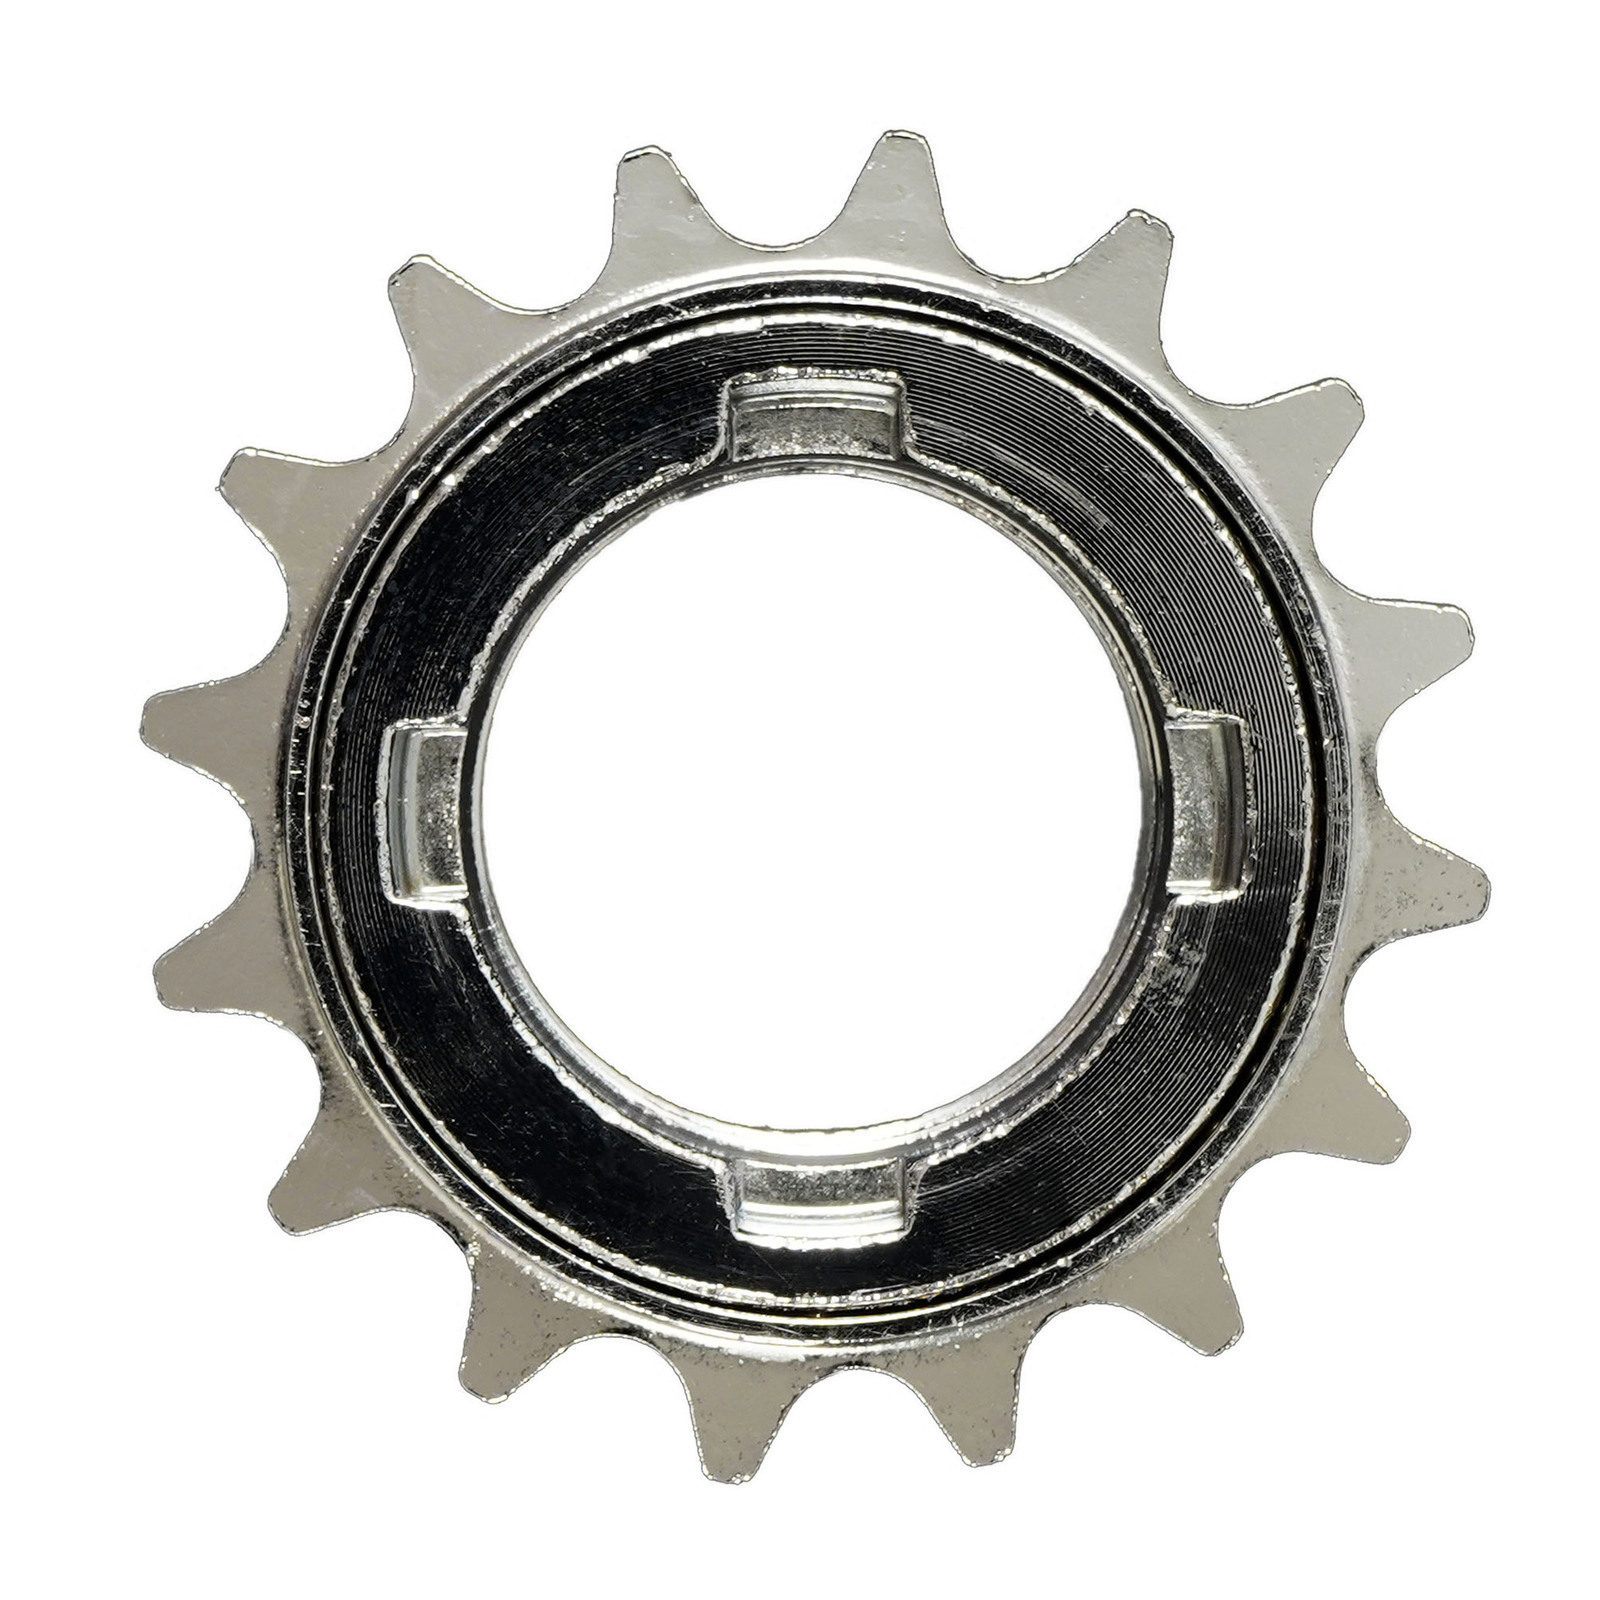 CyclingDeal 16 17 or 18 Teeth Single Speed Bike Bicycle Compatible with Shimano Type Freewheel Cassette 1/2 x1/8 or 1/2 x3/32